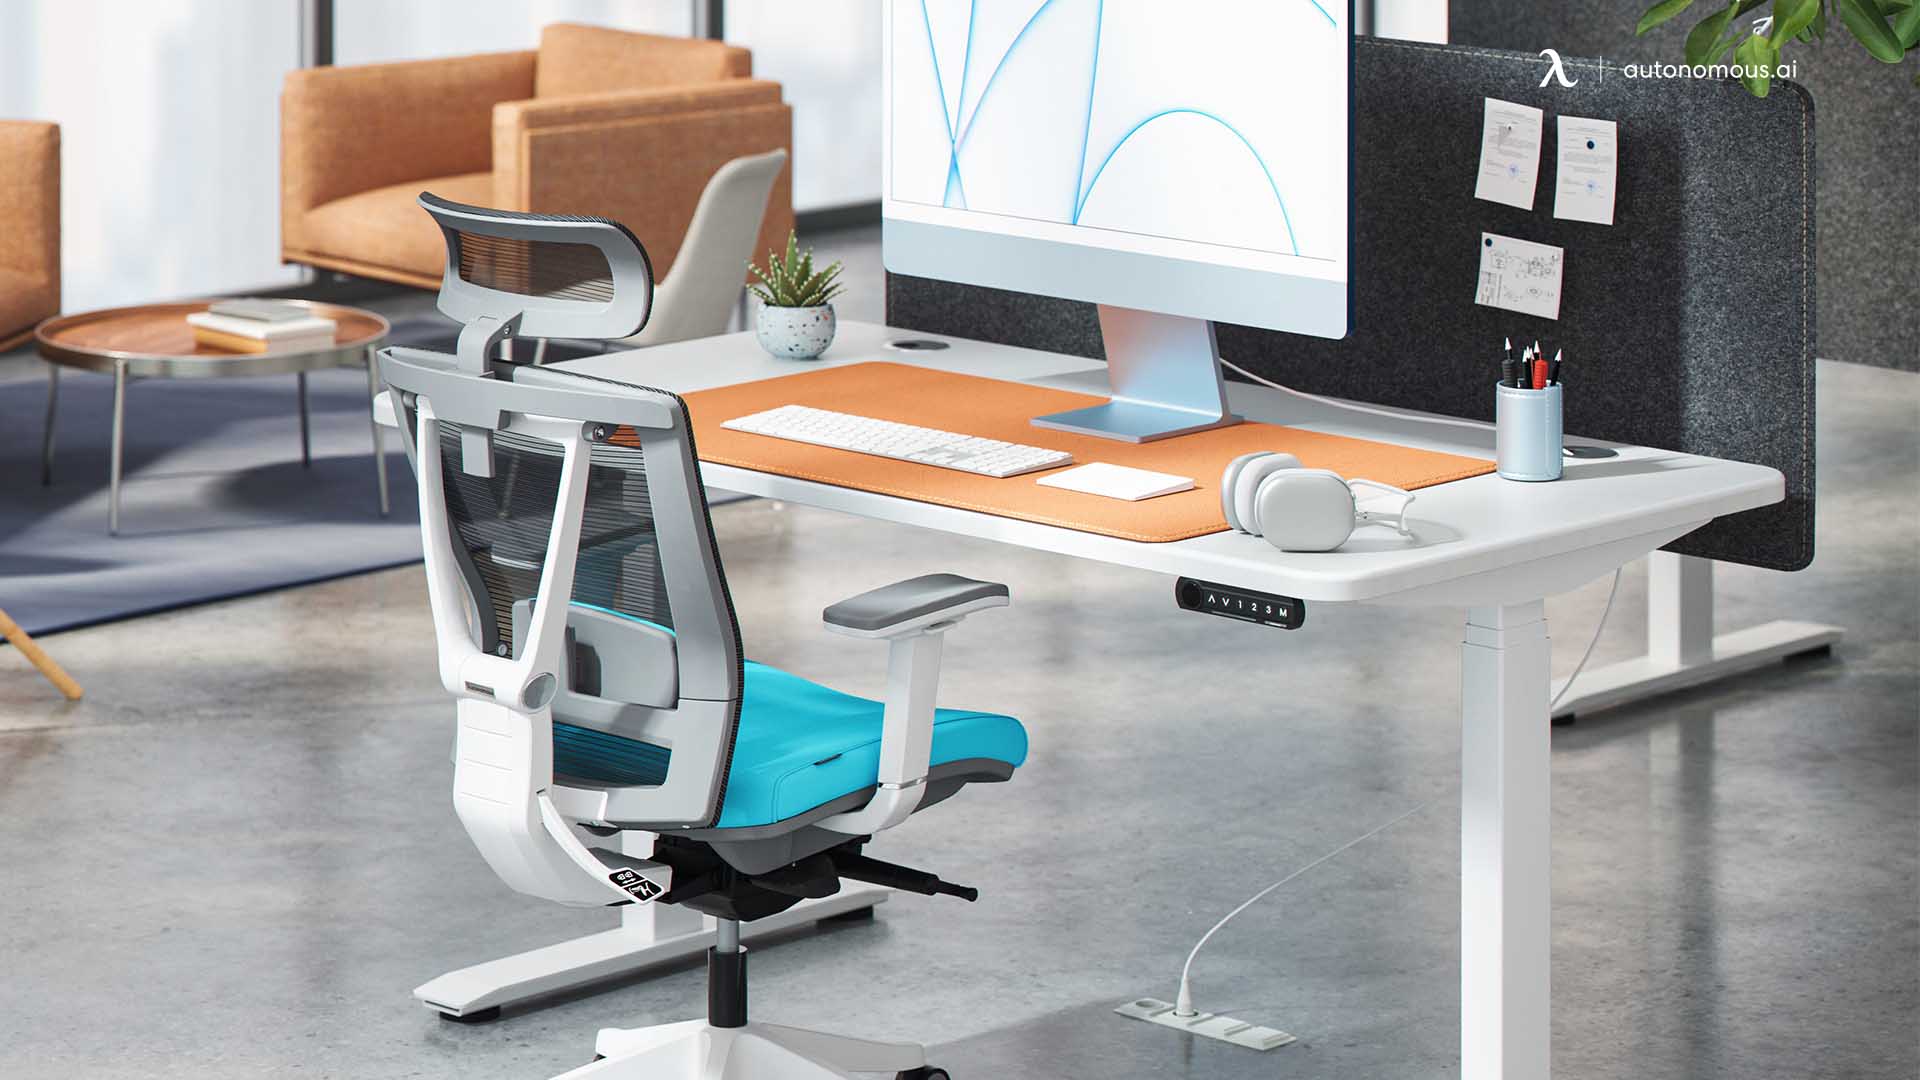 Most Popular & Quality Office Furniture Brands of 2023